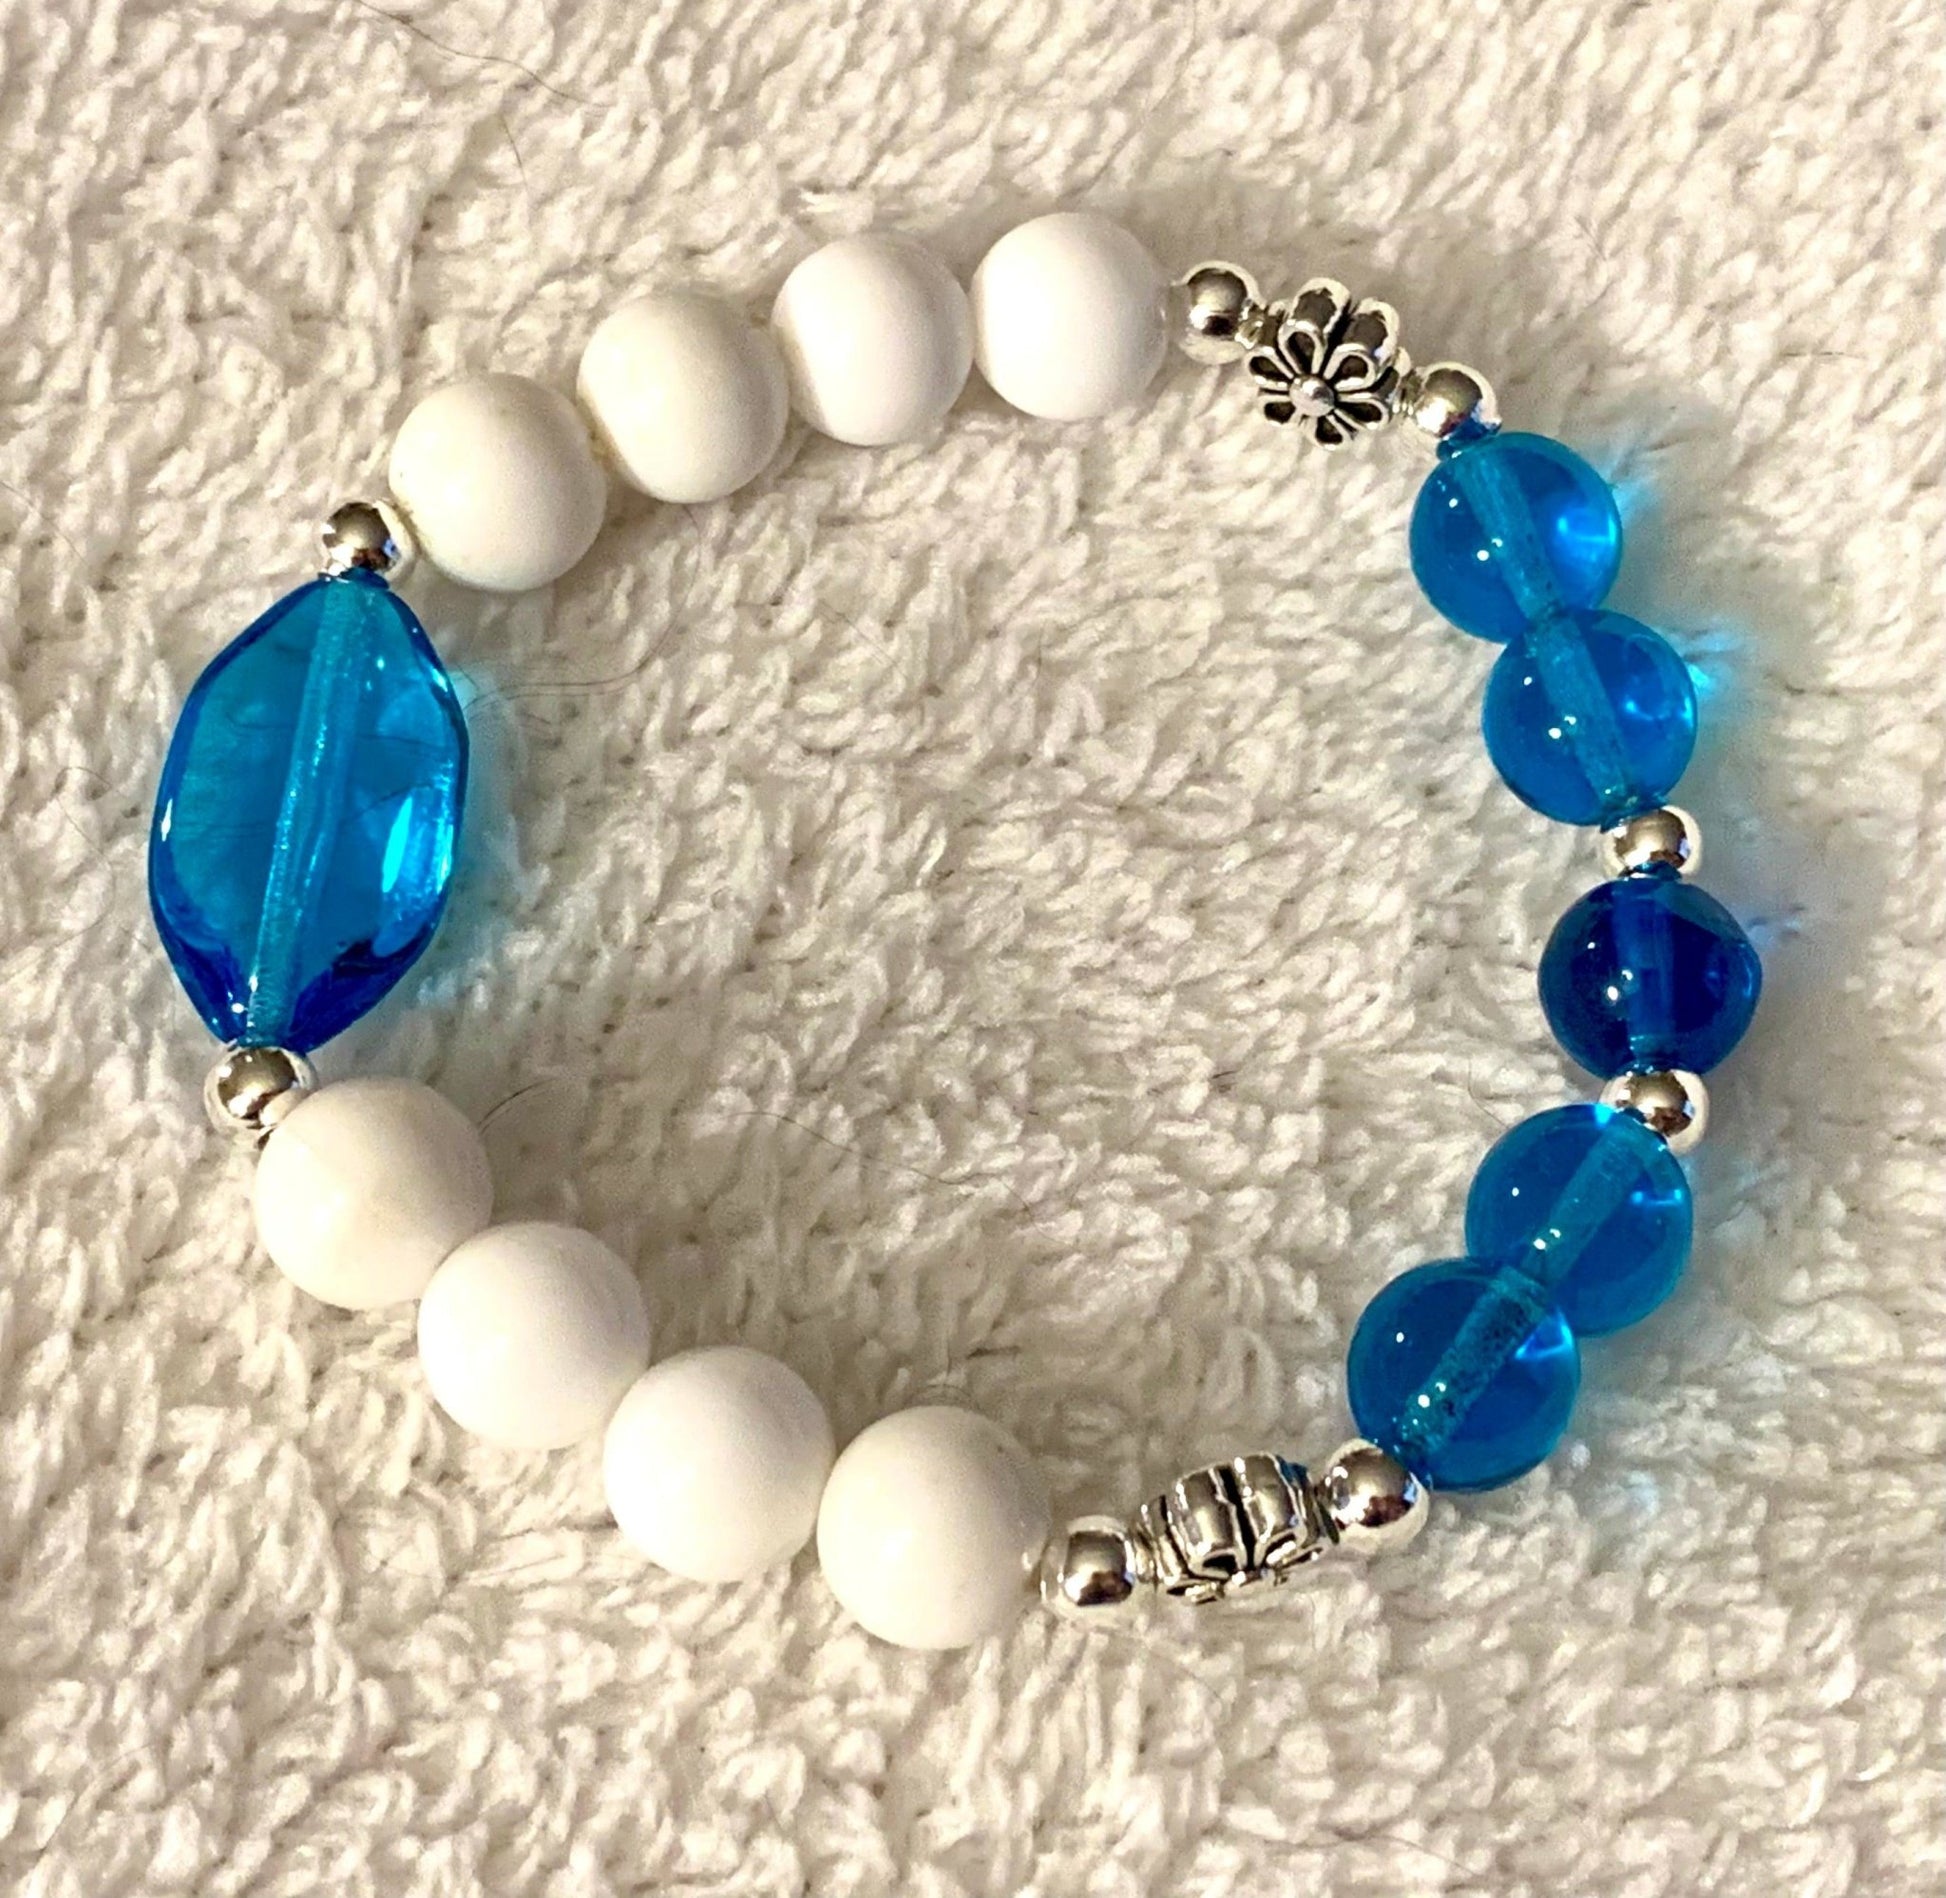 🔴SOLD🔴Skye Handmade Acrylic and Glass Beaded Expandable Bracelet for Kids 4-8 Years Old - Born Mystics